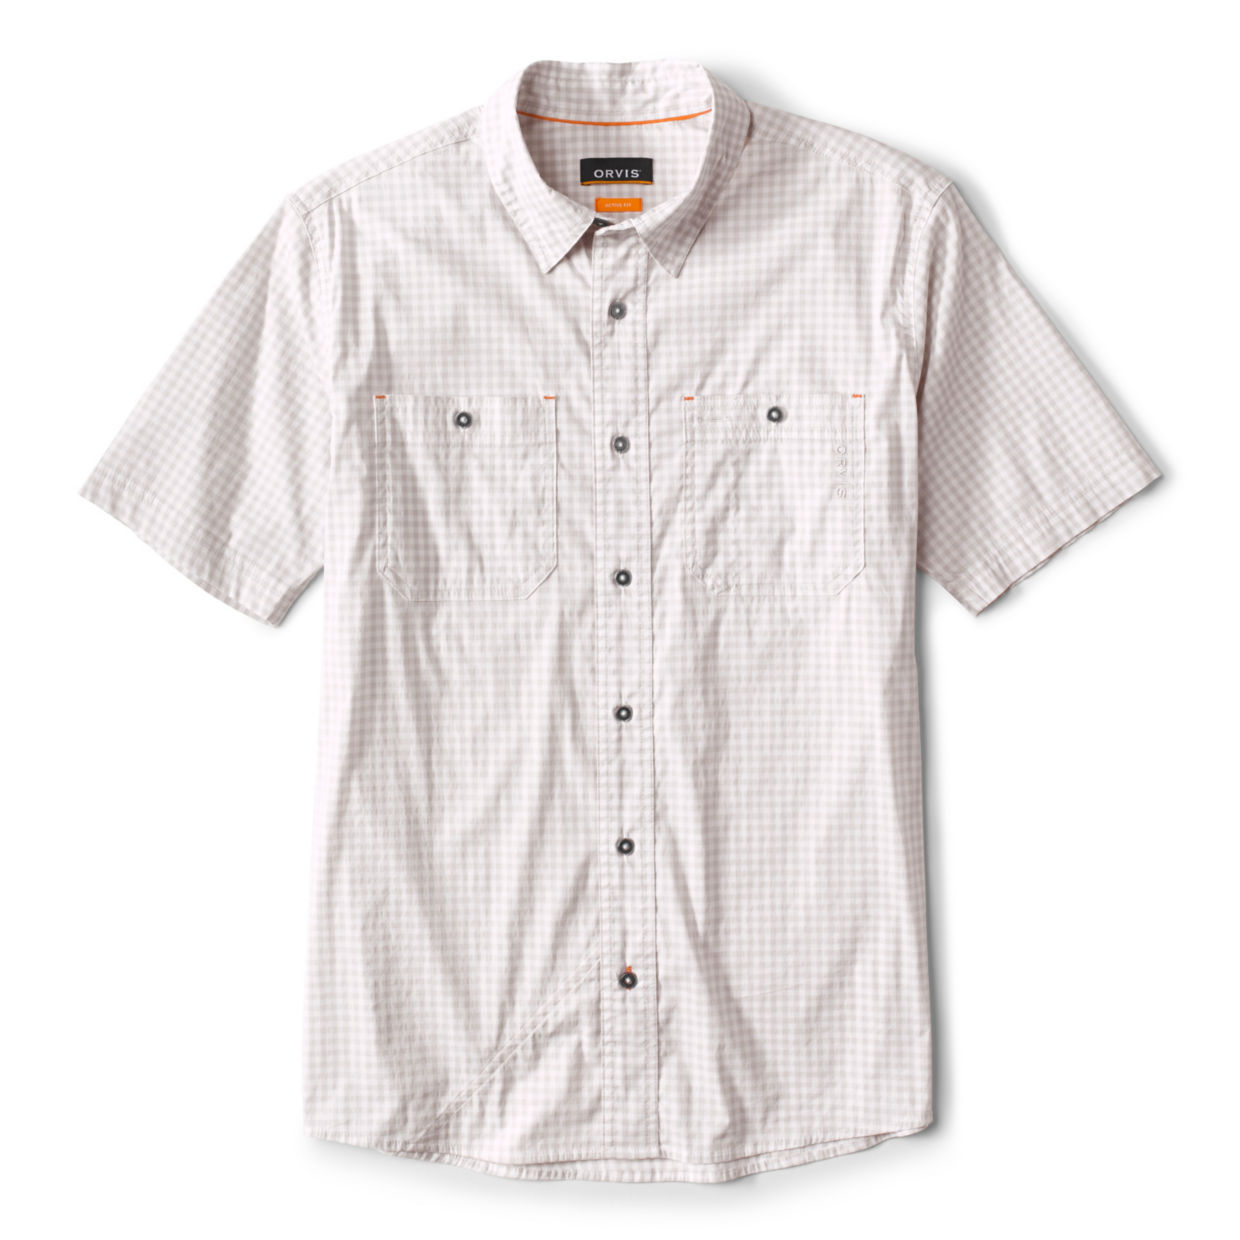 Men's River Guide 2.0 Short-Sleeved Sun Protection Shirt Vapor Size Large Cotton/Nylon/Recycled Materials Orvis